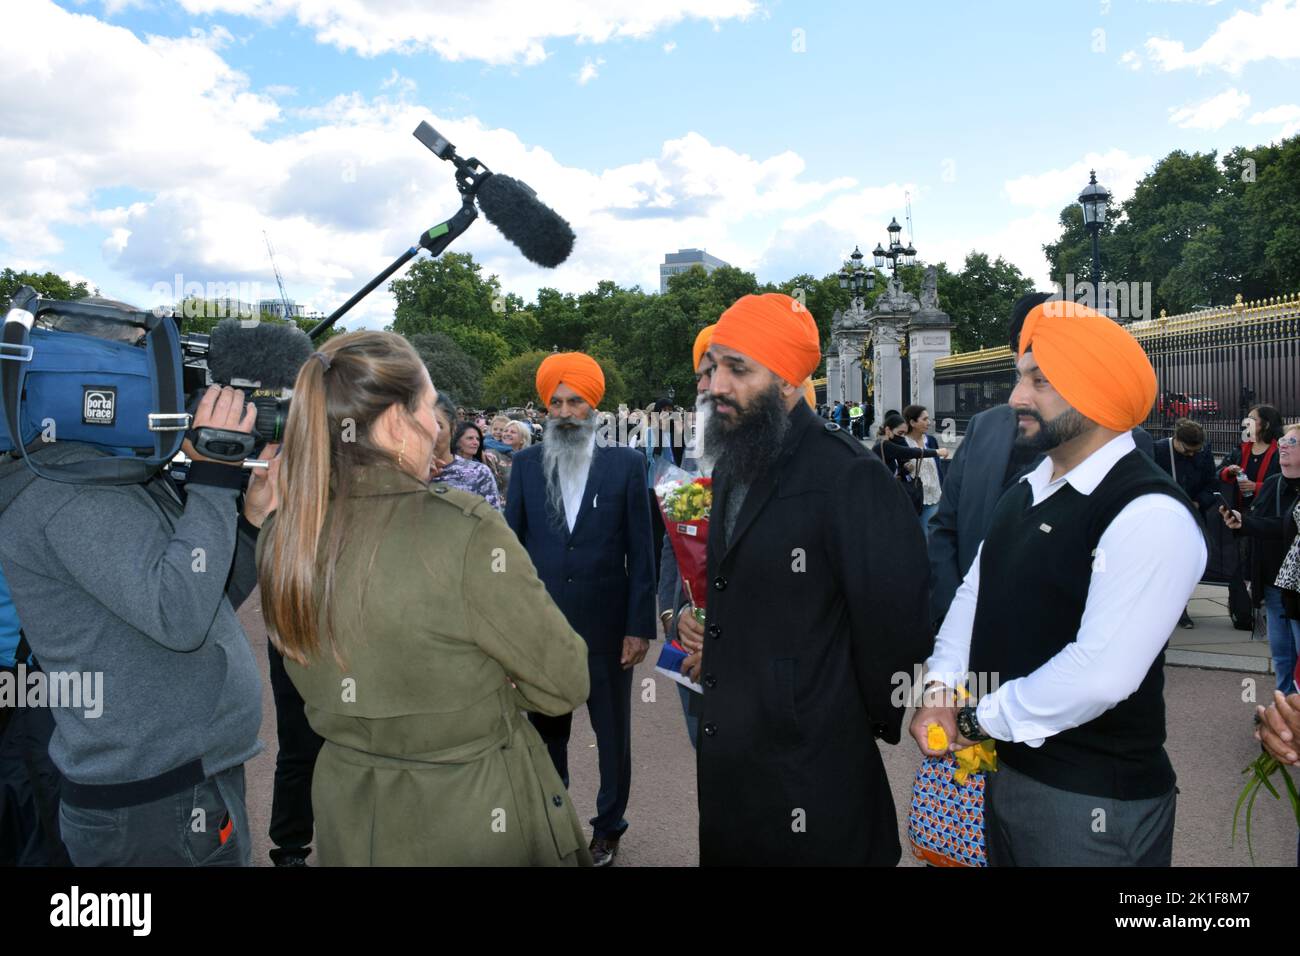 Sikhs being interviewed in front of Buckingham Palace during period of mourning for Queen Elizabeth II, London Sep 2022 Stock Photo